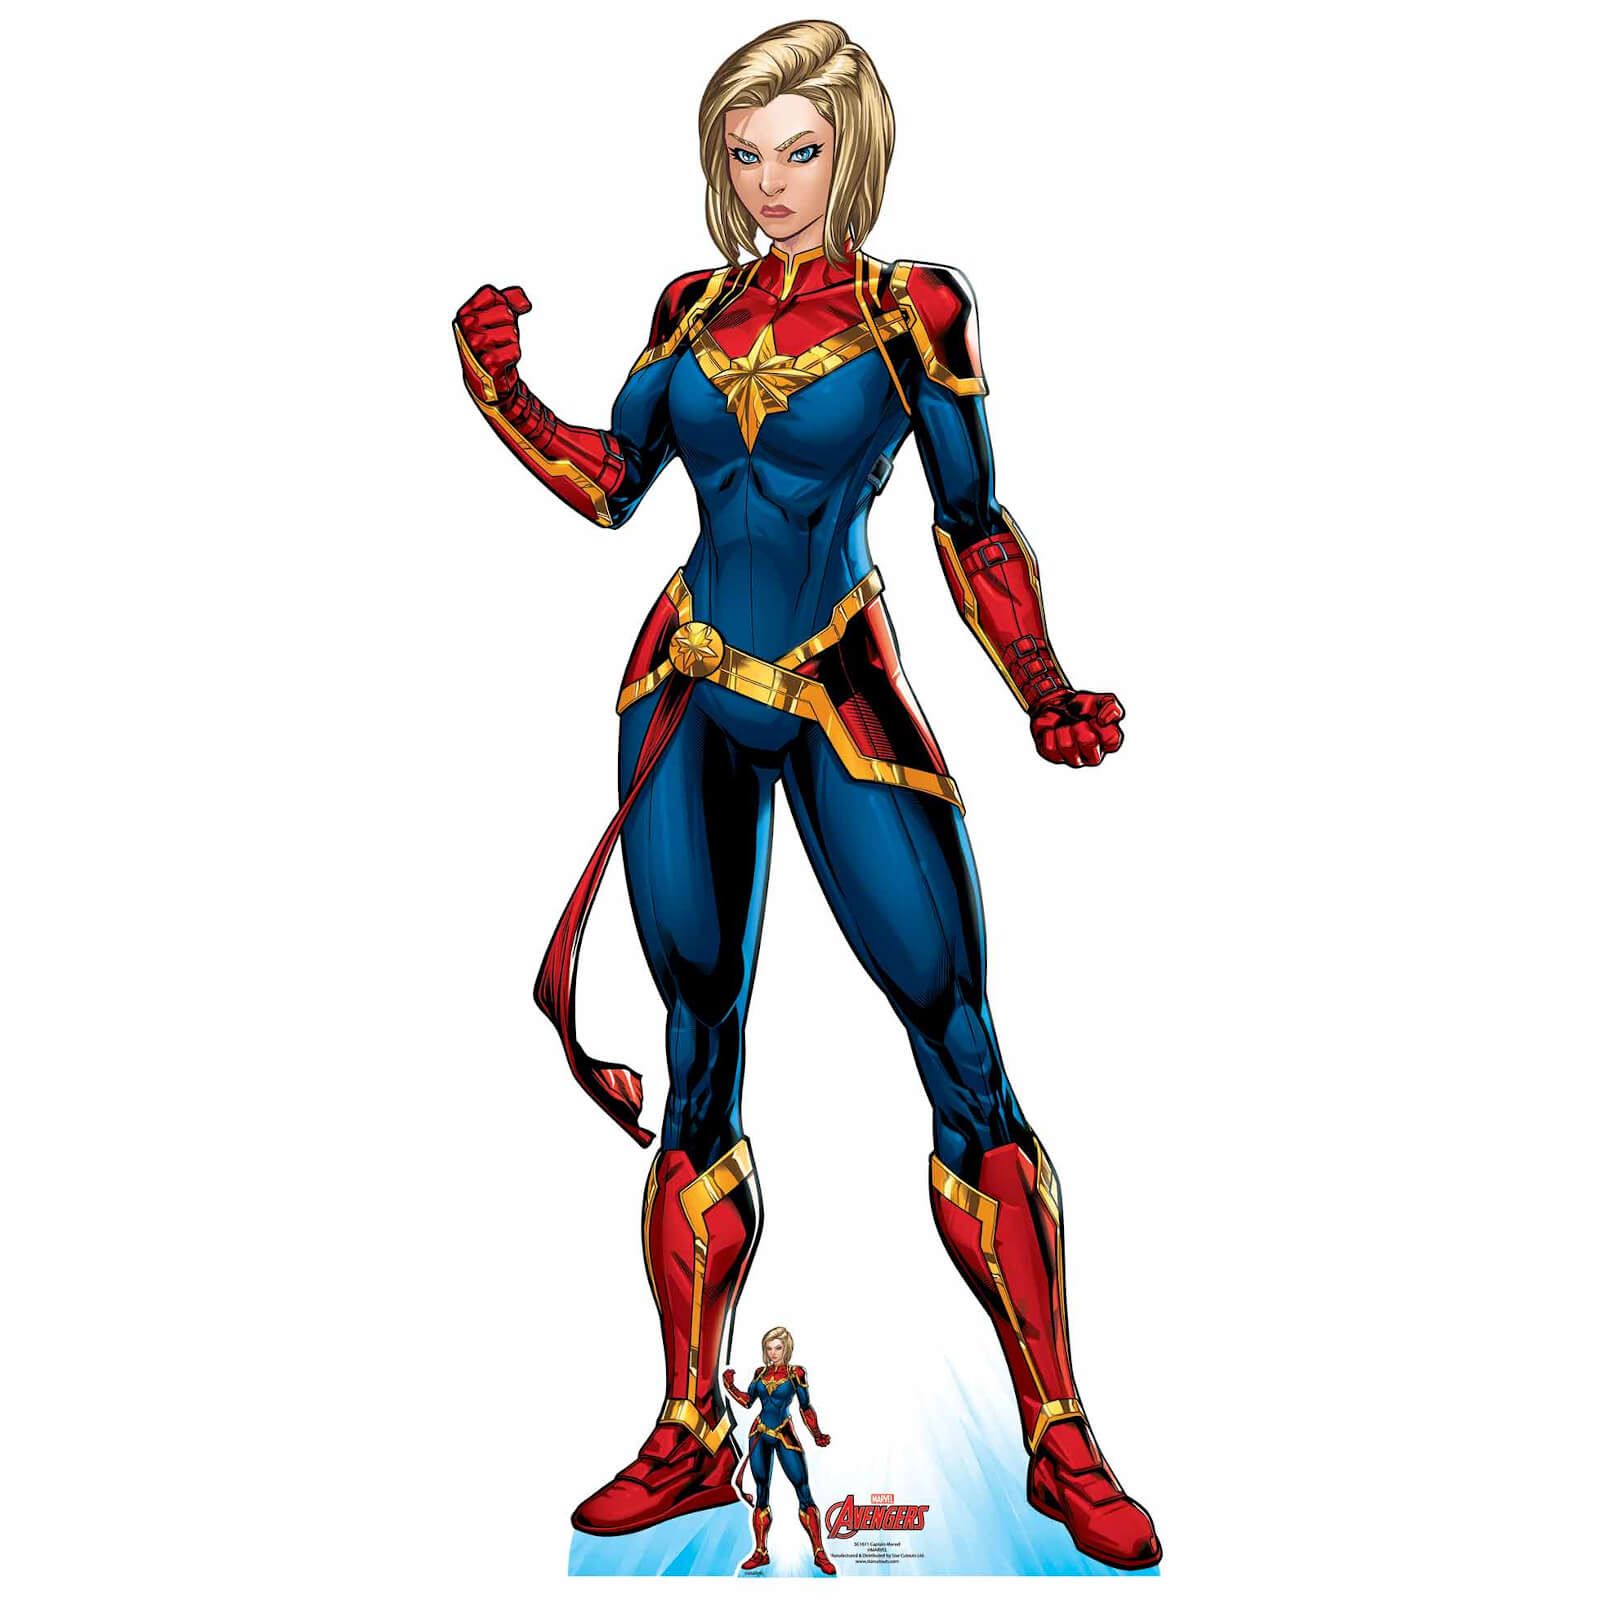 The Avengers Captain Marvel Oversized Cardboard Cut Out